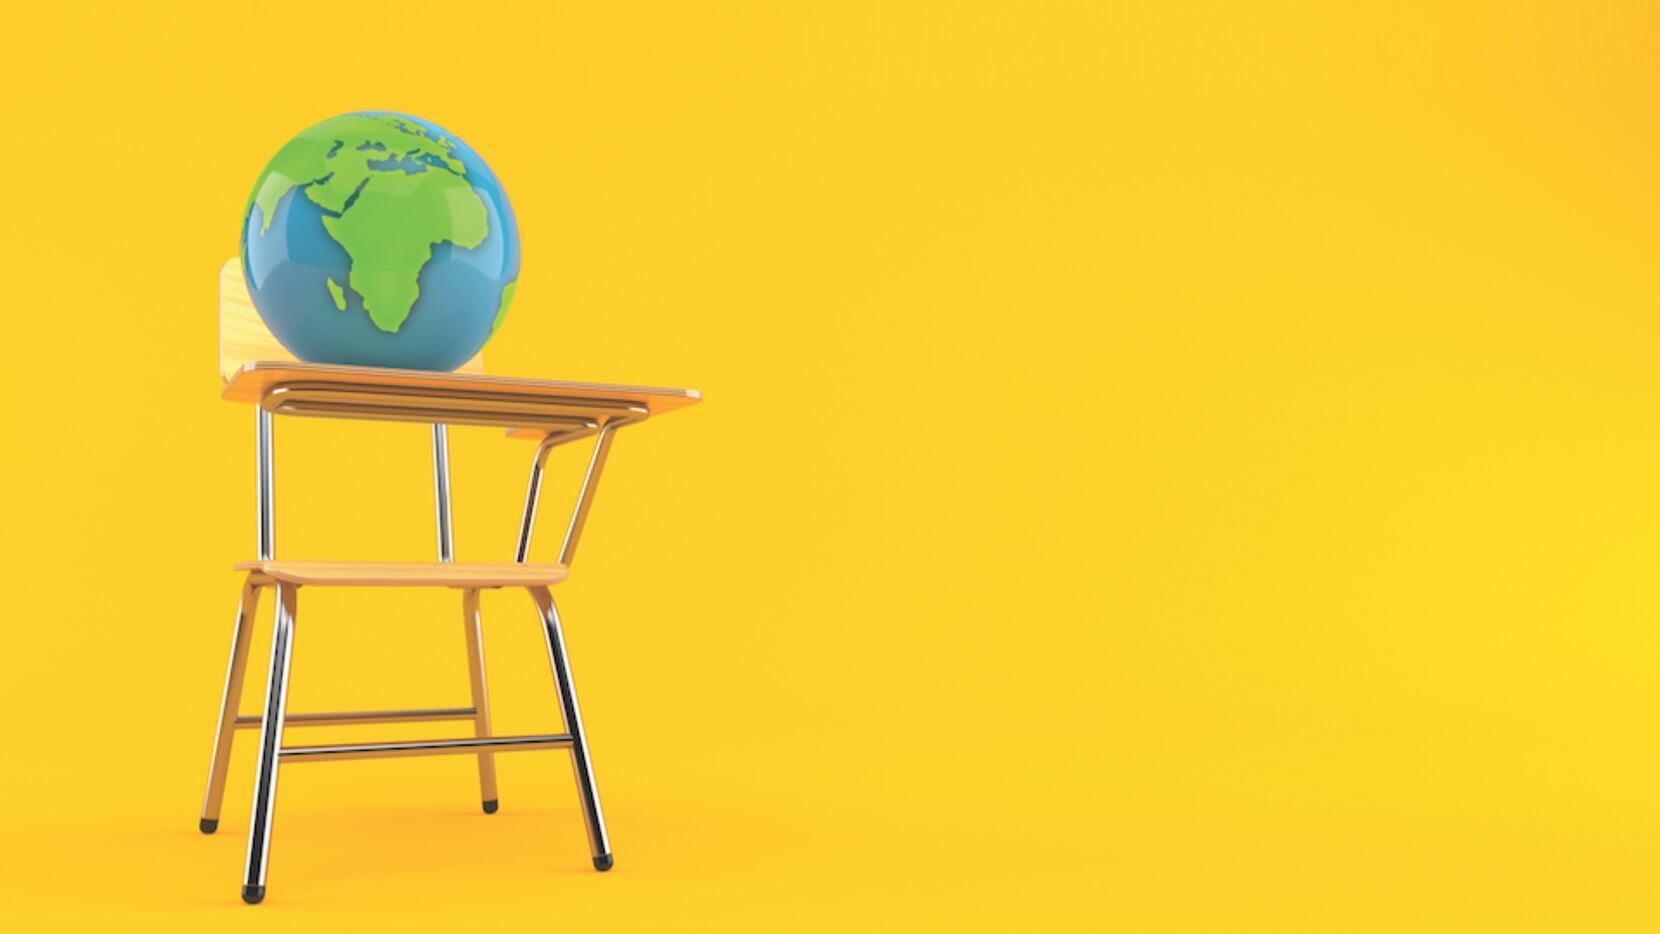 A globe sits on top of a school desk against a yellow background.